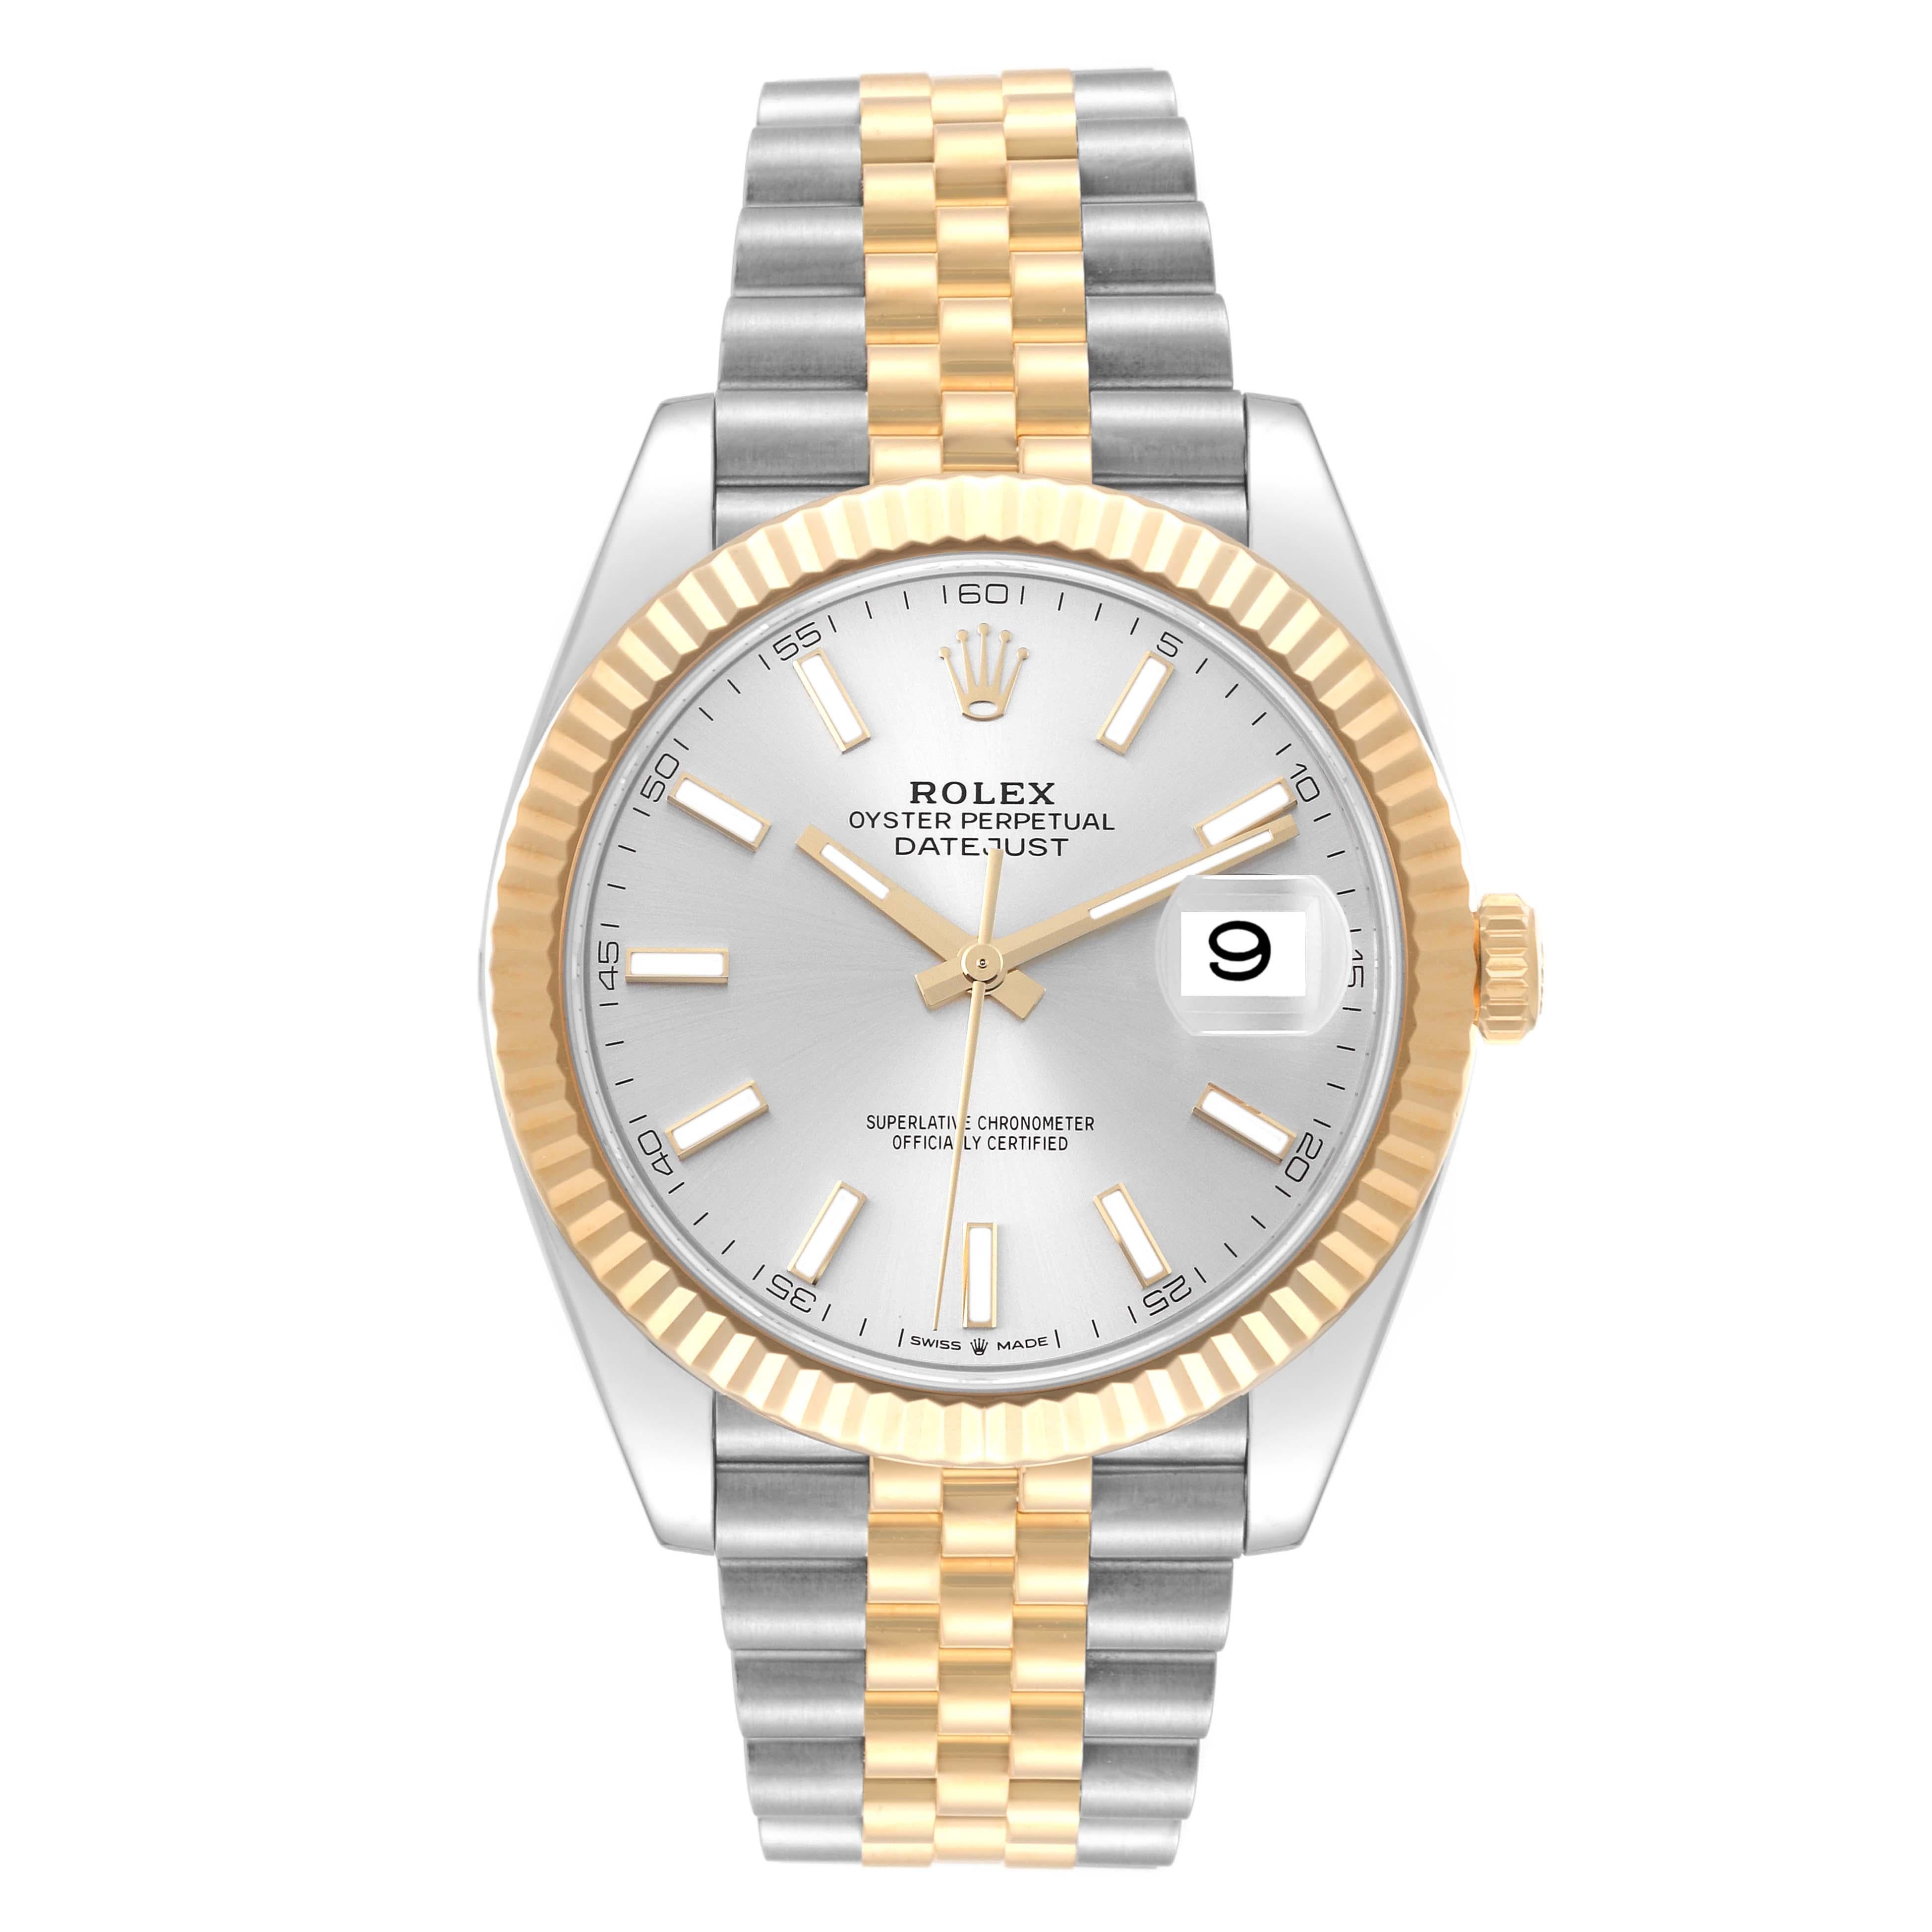 Rolex Datejust 41 Steel Yellow Gold Silver Dial Mens Watch 126333 Box Card. Officially certified chronometer automatic self-winding movement with quickset date. Stainless steel and 18K yellow gold case 41.0 mm in diameter. High polished lugs. Rolex